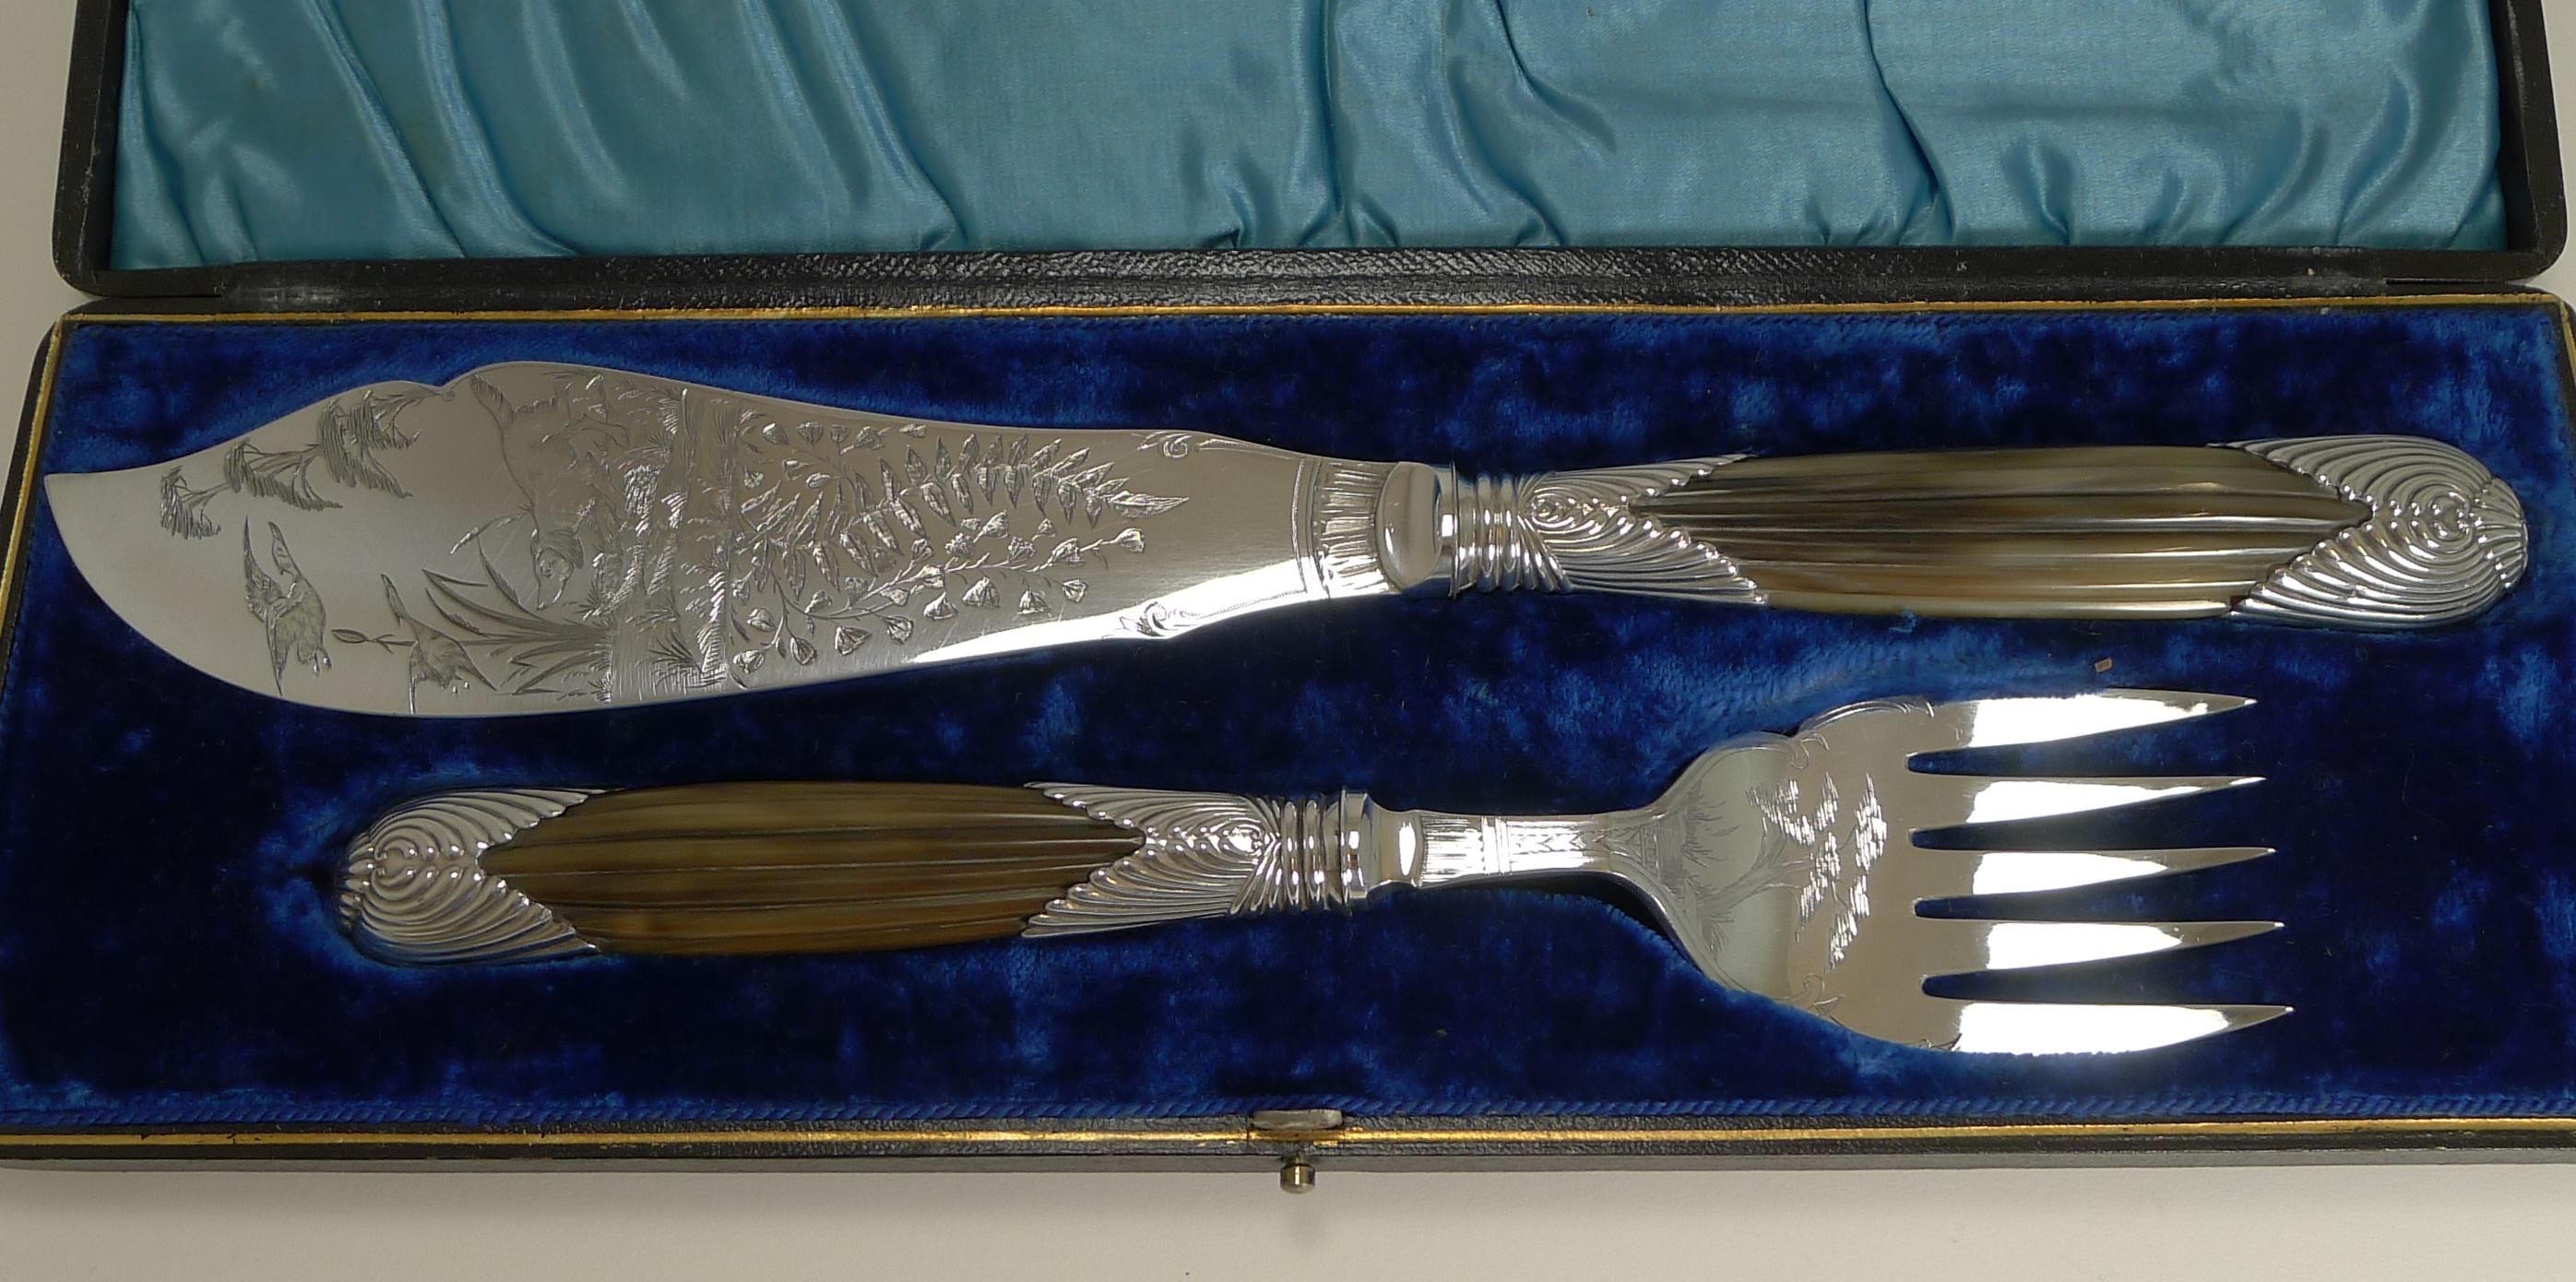 About as special as they get and something I haven't come across before. Opening the original presentation case reveals a superb pair of silver plated fish servers with hand carved handles.

One makes these highly sought-after is the beautifully